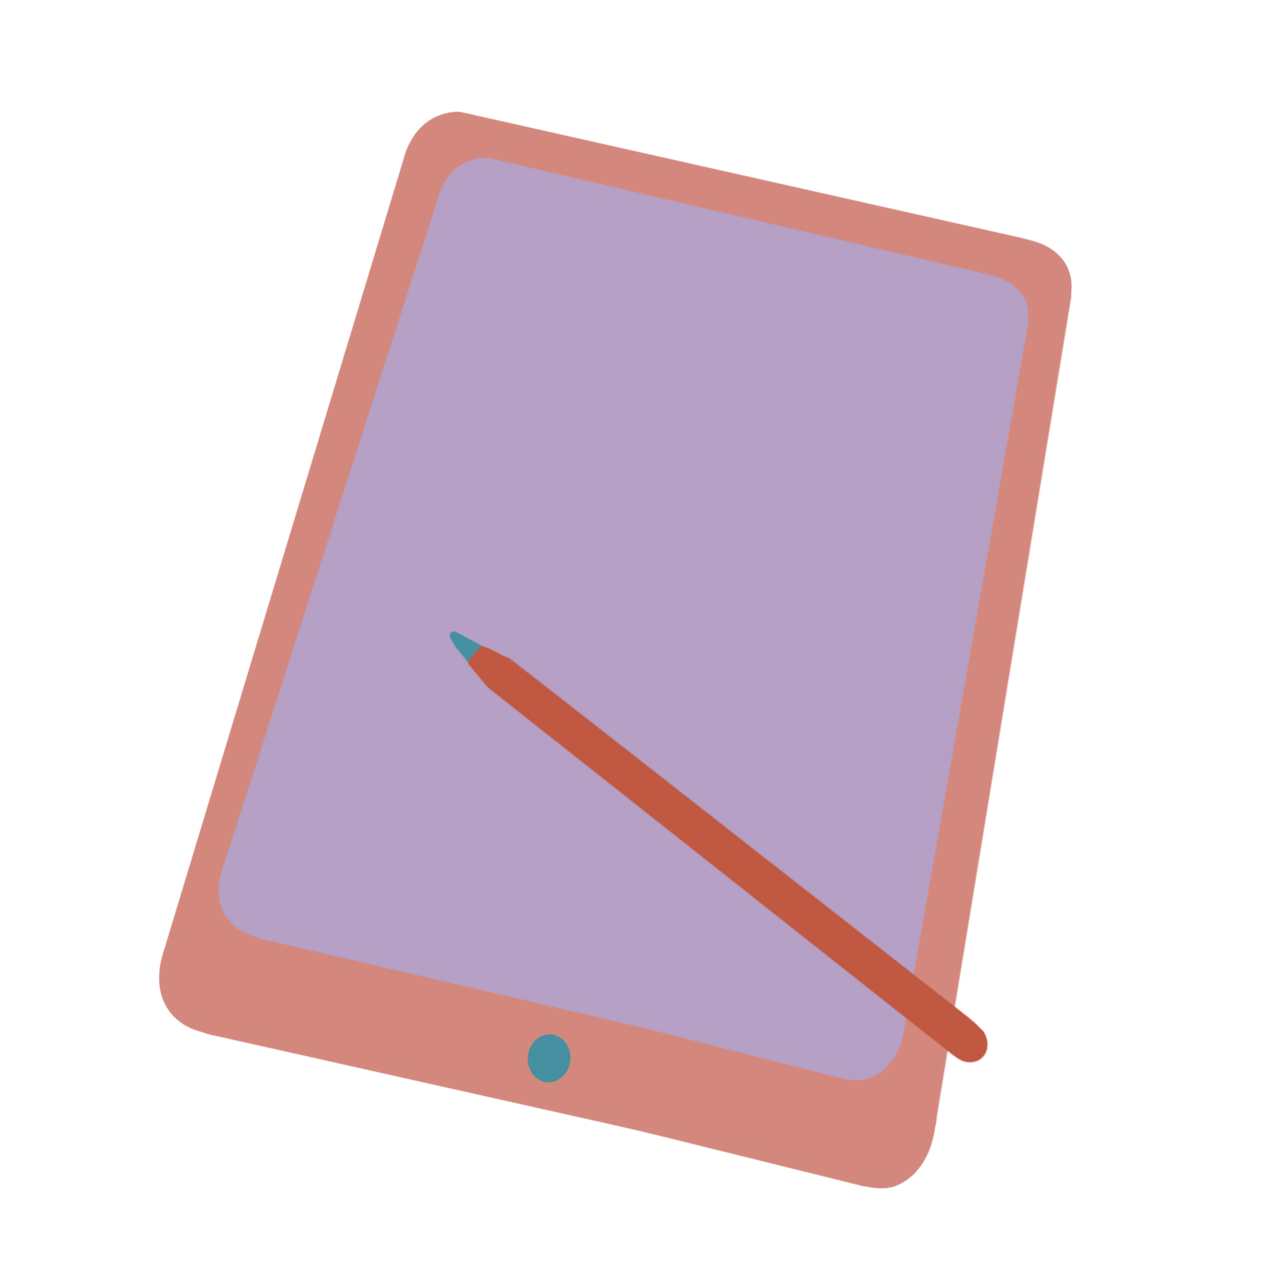 An illustration of an ipad and apple pencil